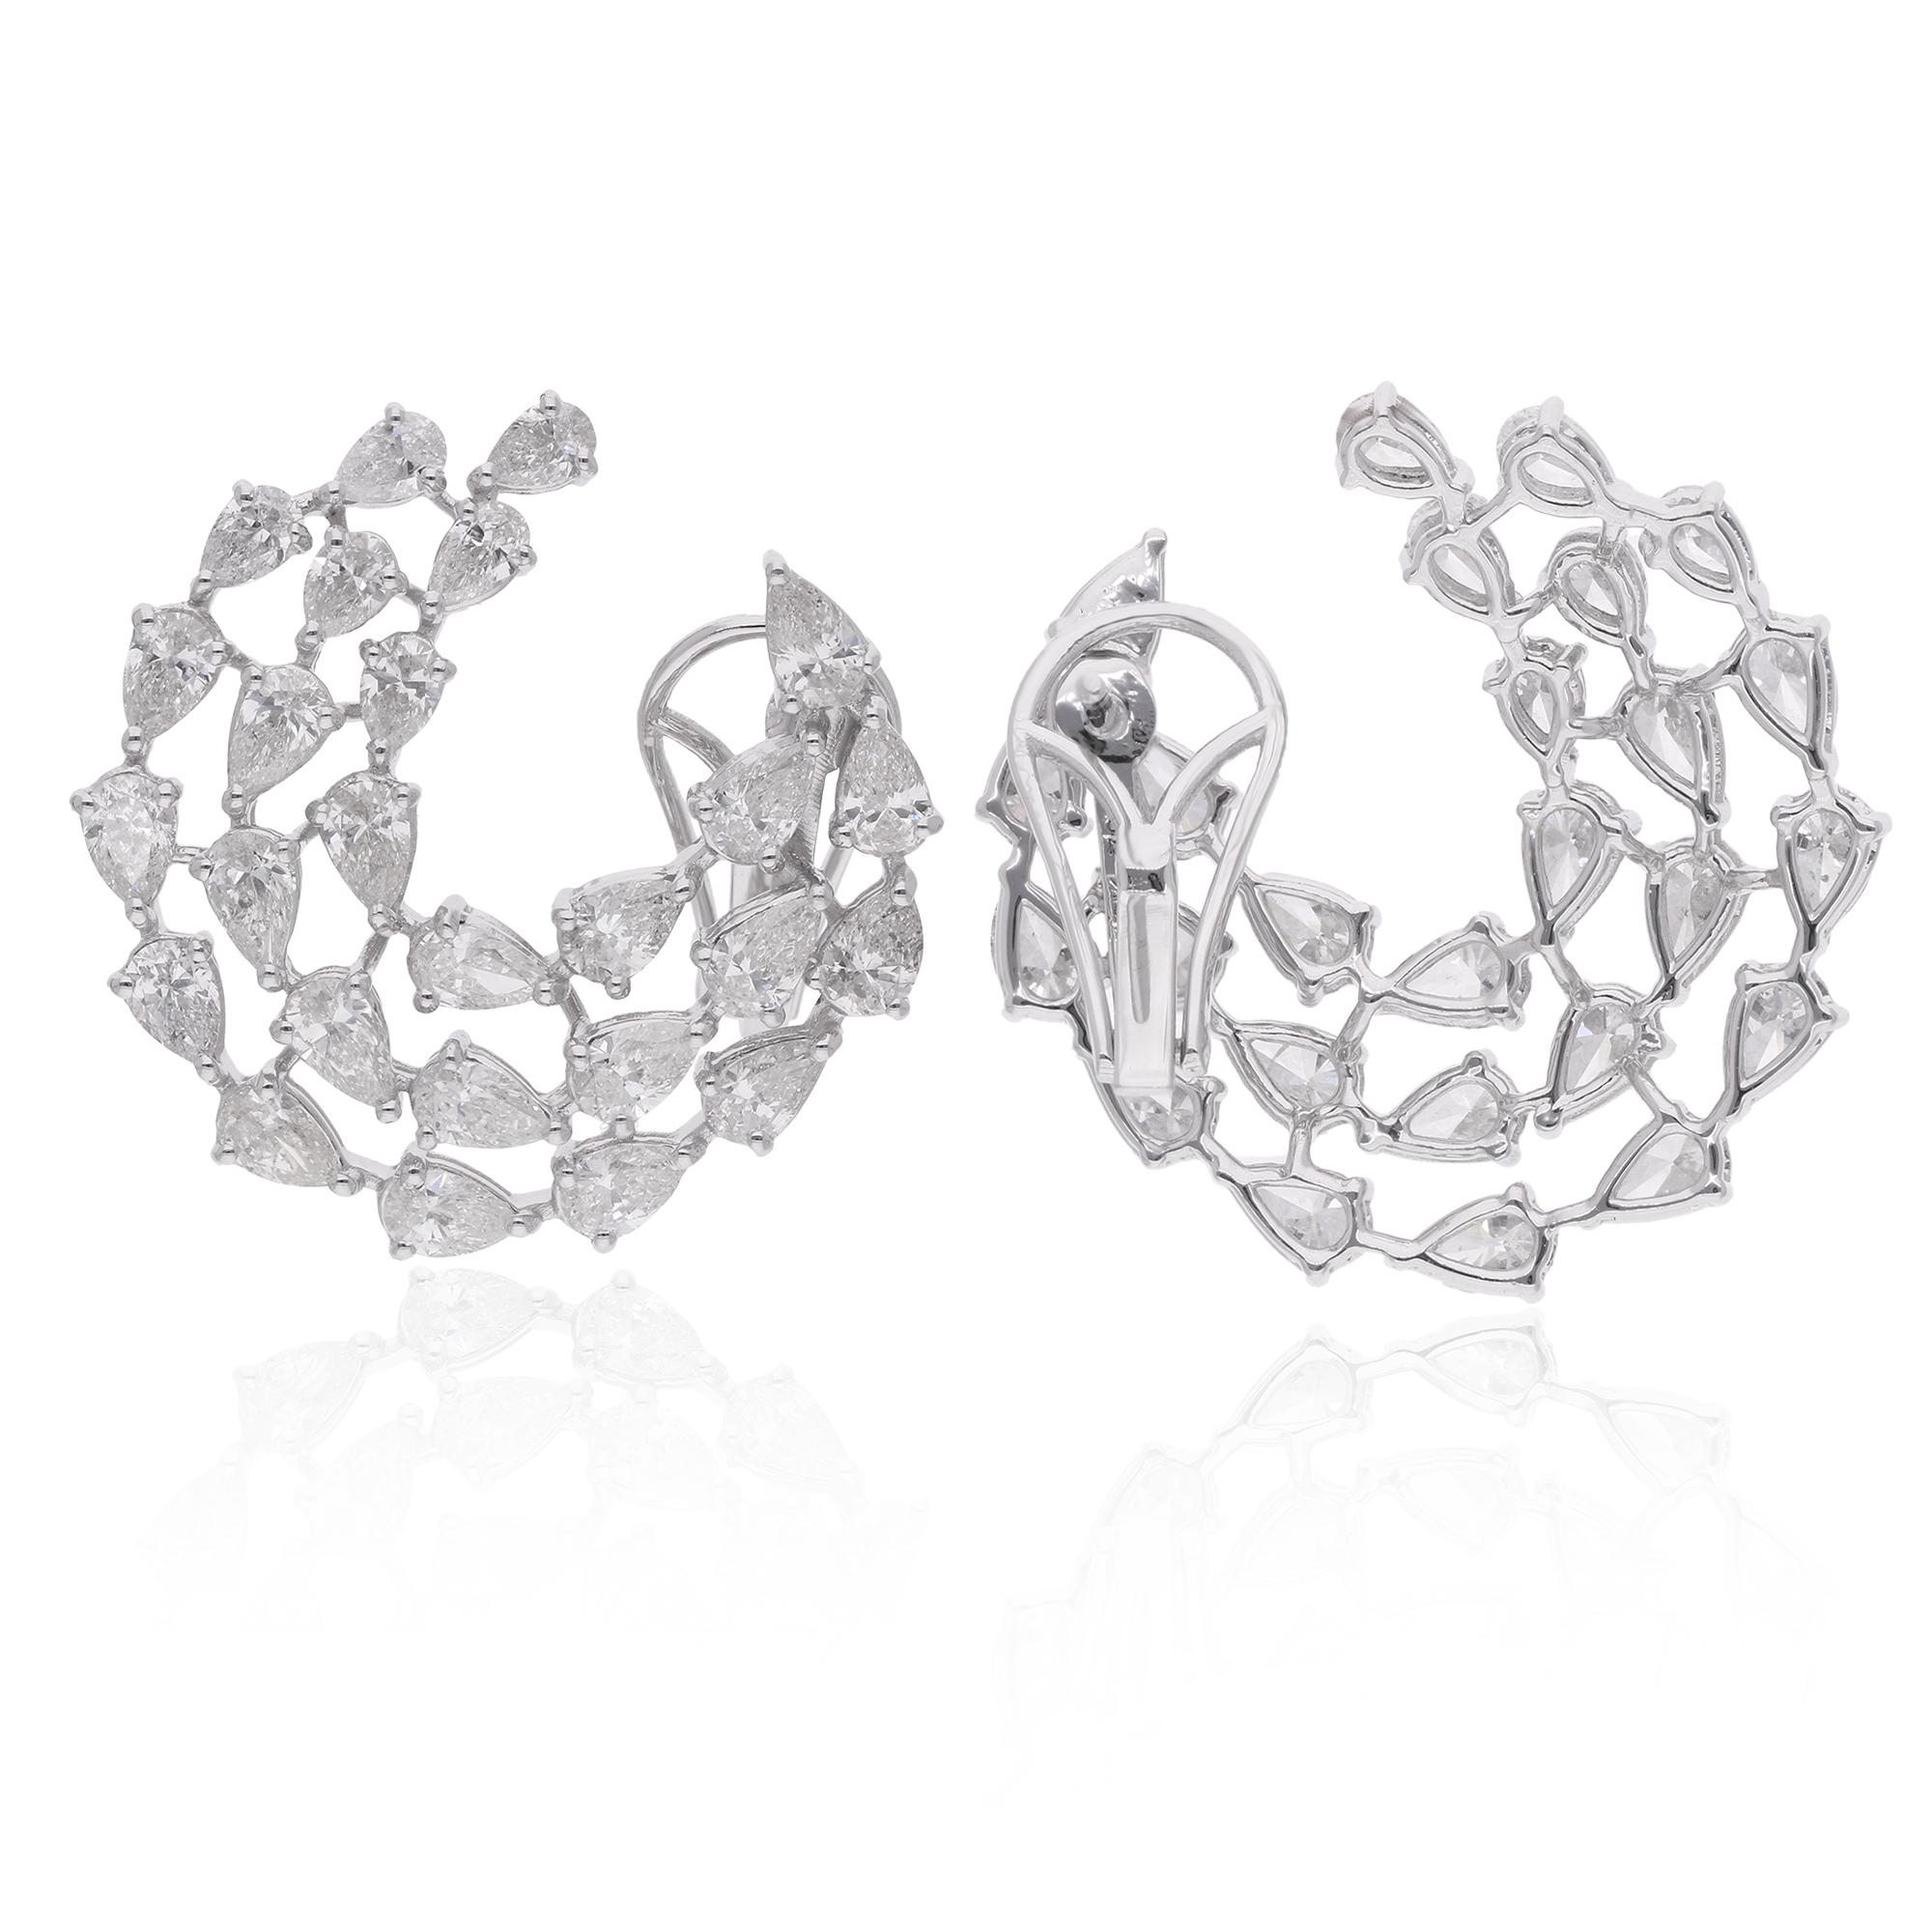 Crafted with precision and attention to detail, the earrings are fashioned in solid 18 Karat White Gold, adding a touch of luxury and refinement to the design. The white gold setting provides the perfect backdrop for the diamonds, enhancing their